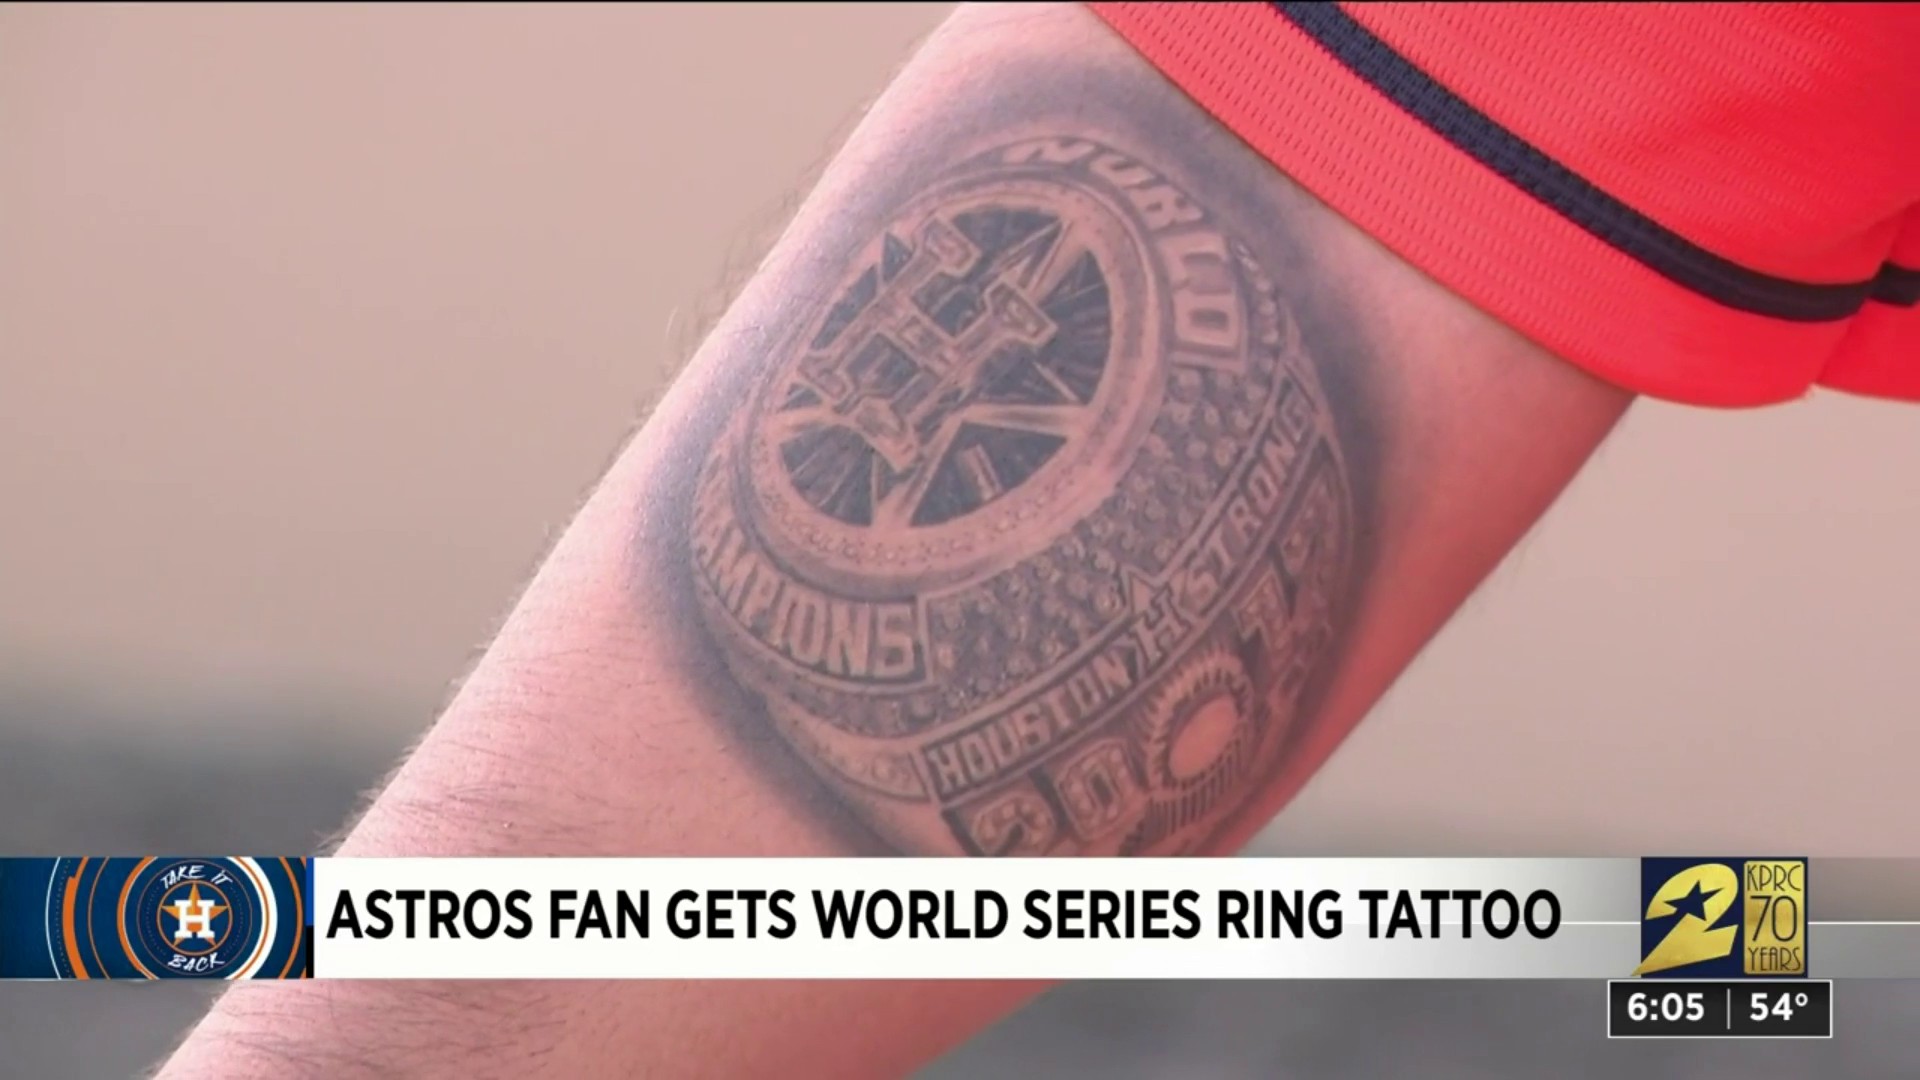 Houston tattoo shop honoring first responders gets its own TV show   khoucom